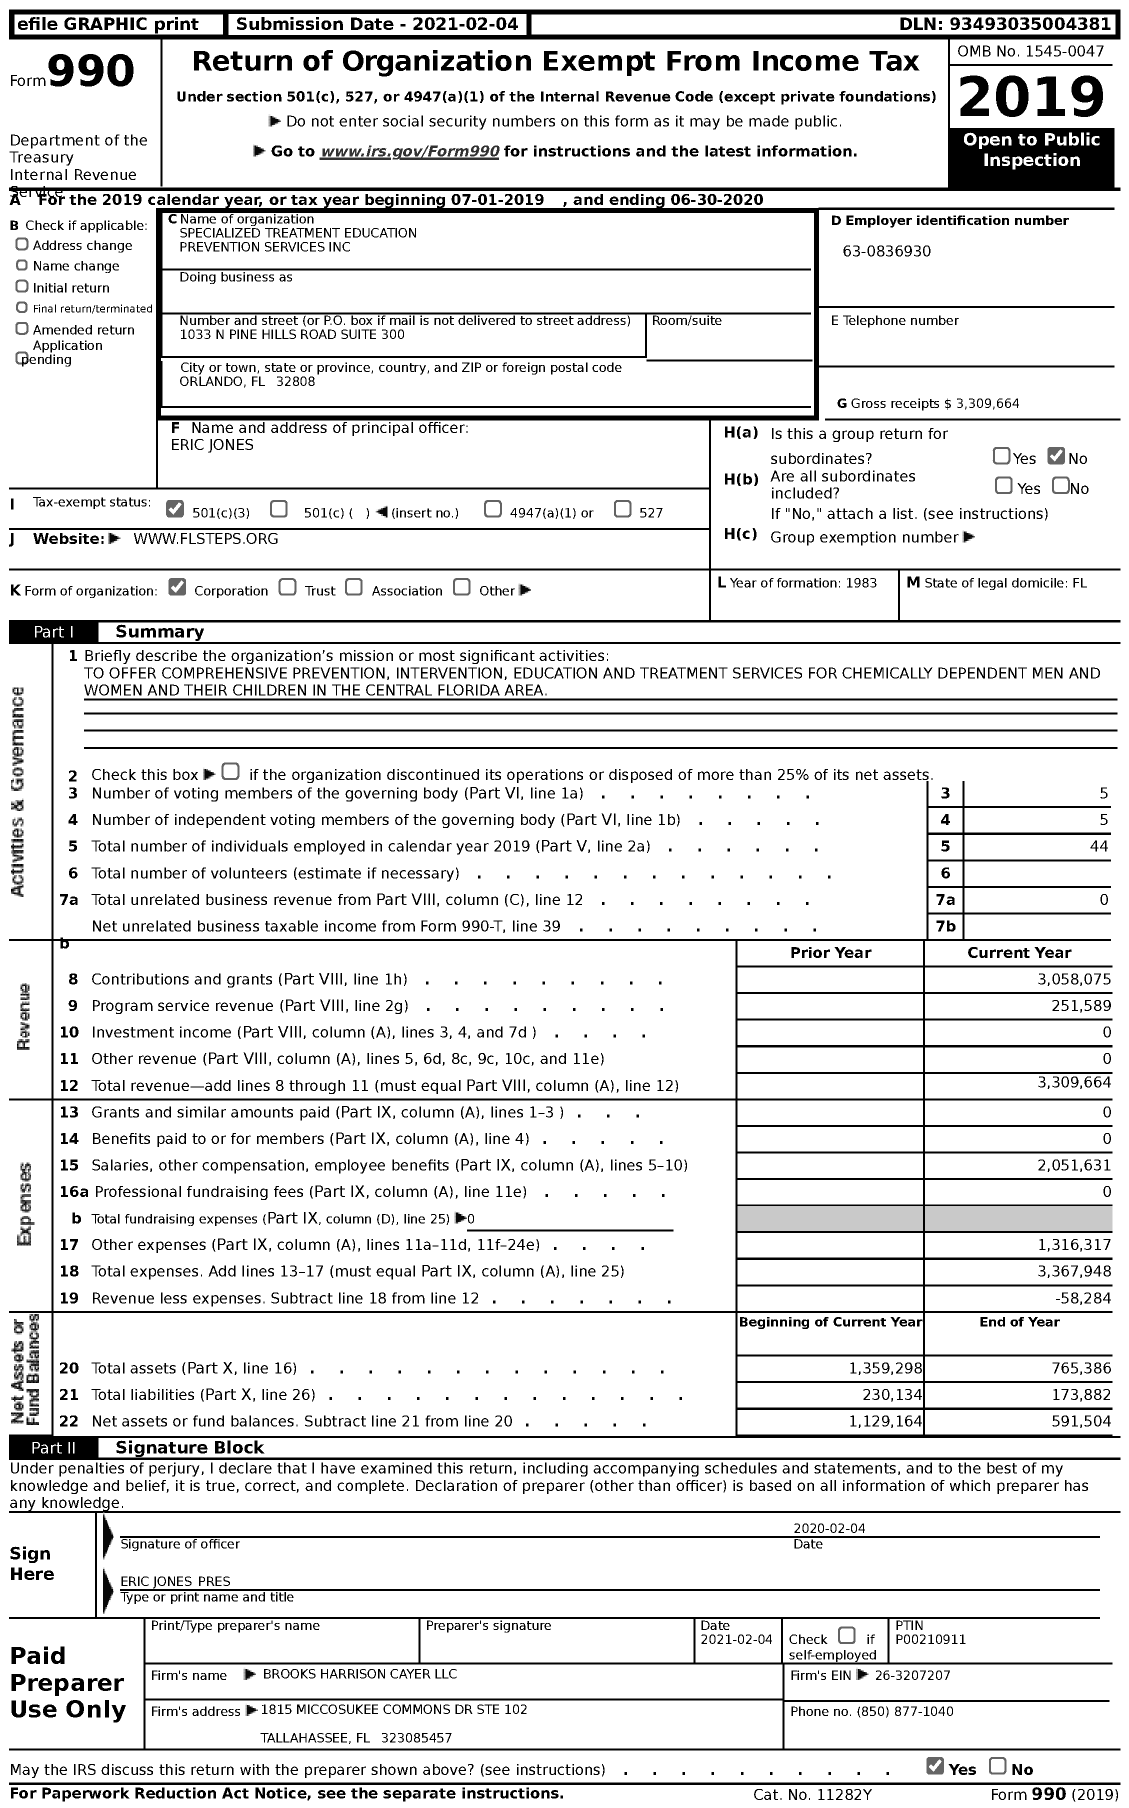 Image of first page of 2019 Form 990 for Specialized Treatment Education Prevention Services (STEPS)